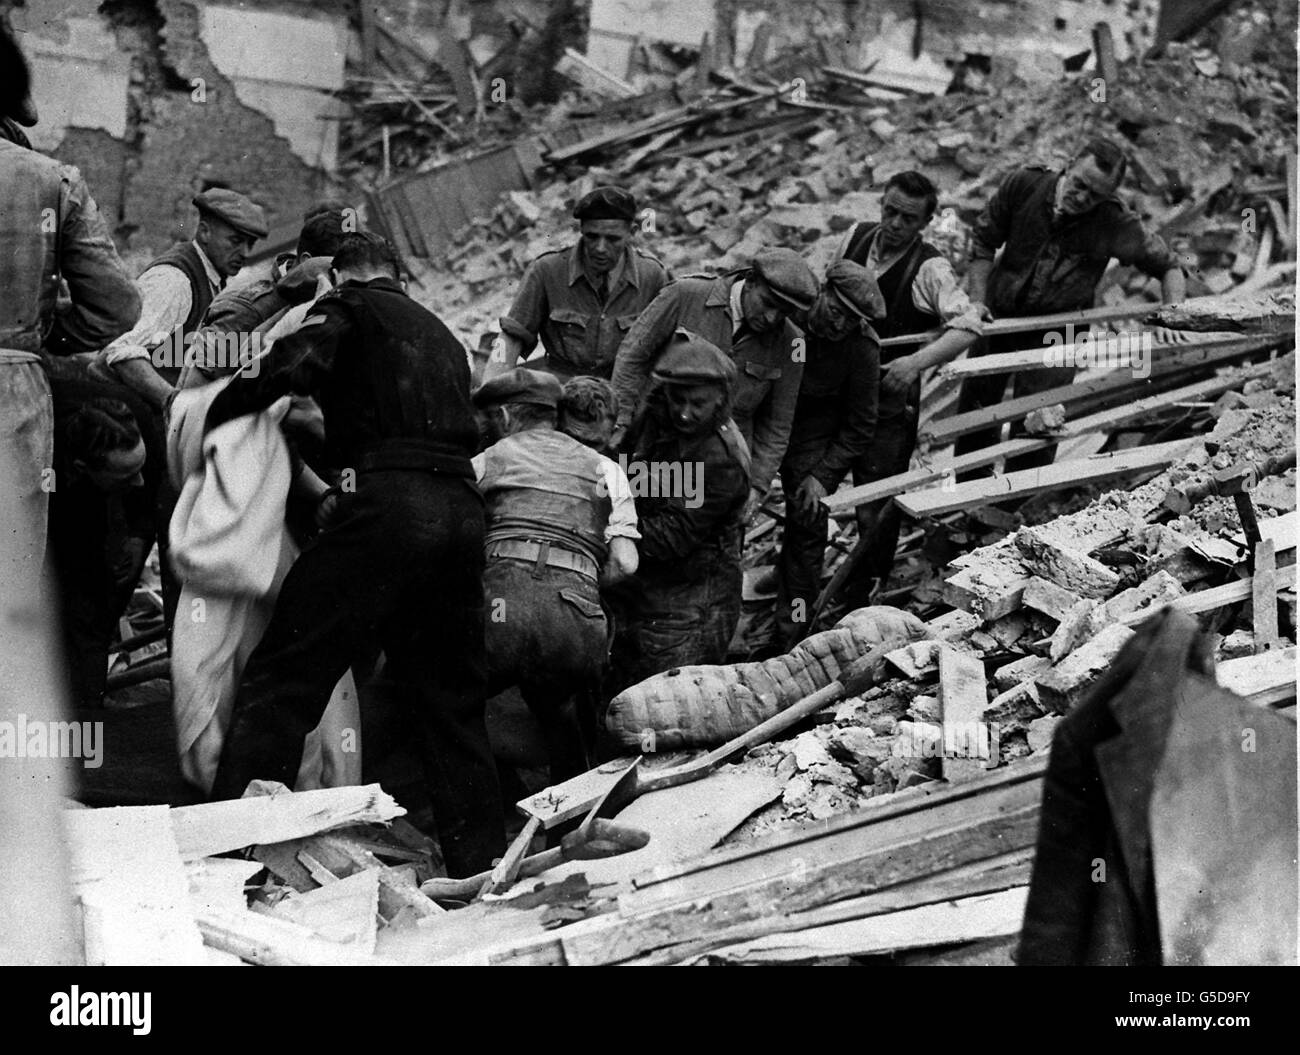 GERMAN AIR RAID 1943: After hours of hard work a man is released from under a great pile of debris following a night raid by the Luftwaffe in the London area. Picture part of PA Second World War collection. Stock Photo